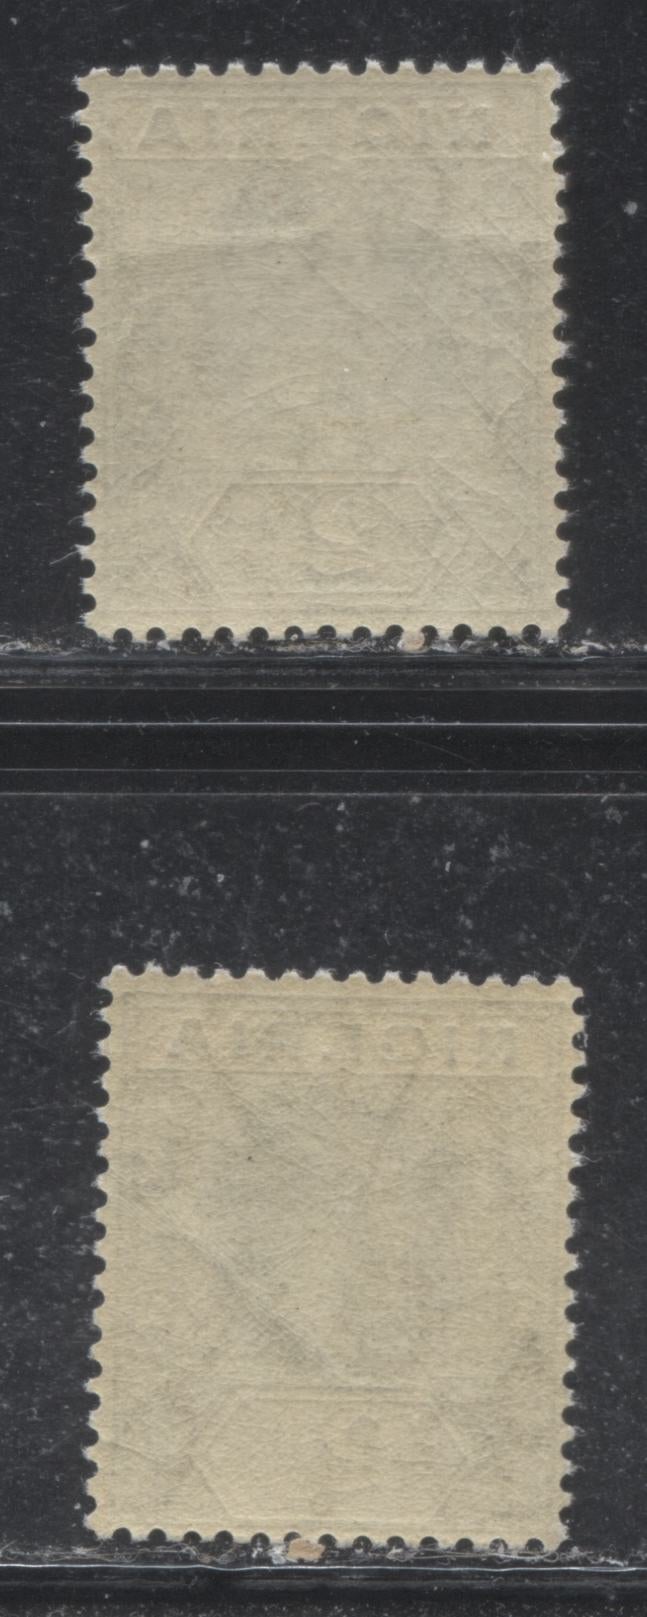 Lot 177 Nigeria SG# 3 2d Grey King George V, 1914-1921 Multiple Crown CA Imperium Keyplate Issue, Two VFNH Examples, From Different Printings, Each a Slightly Different Shade